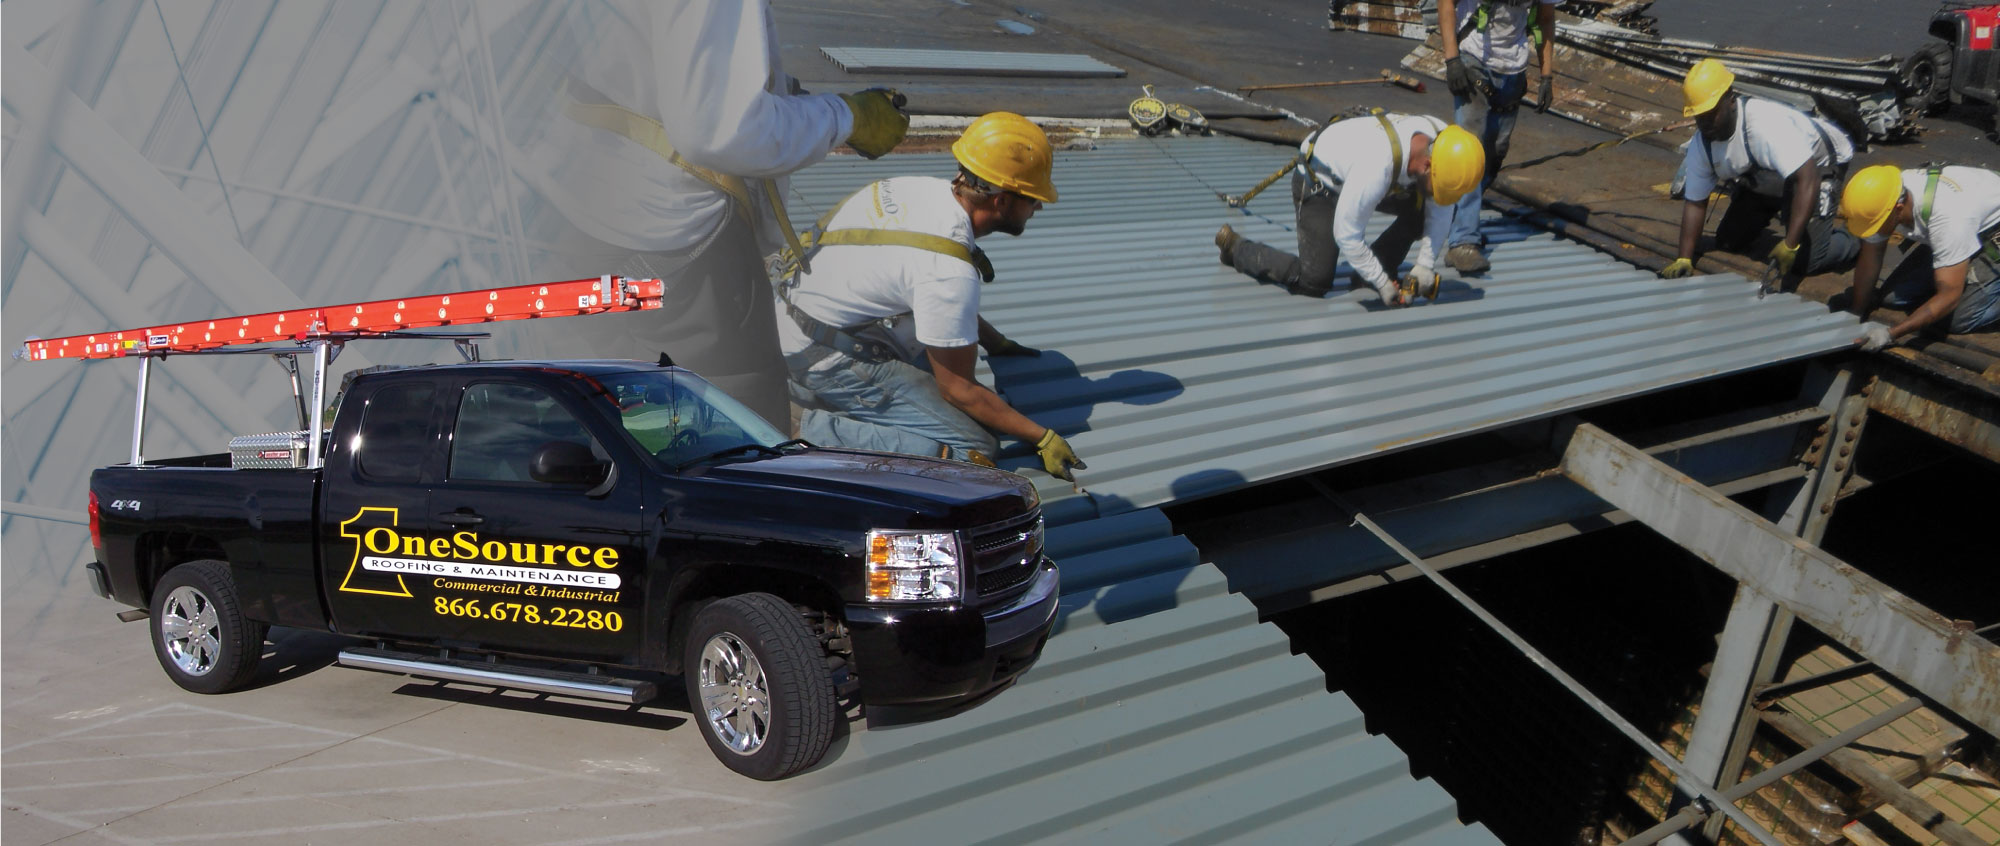 One Source Roofing  Mntnc